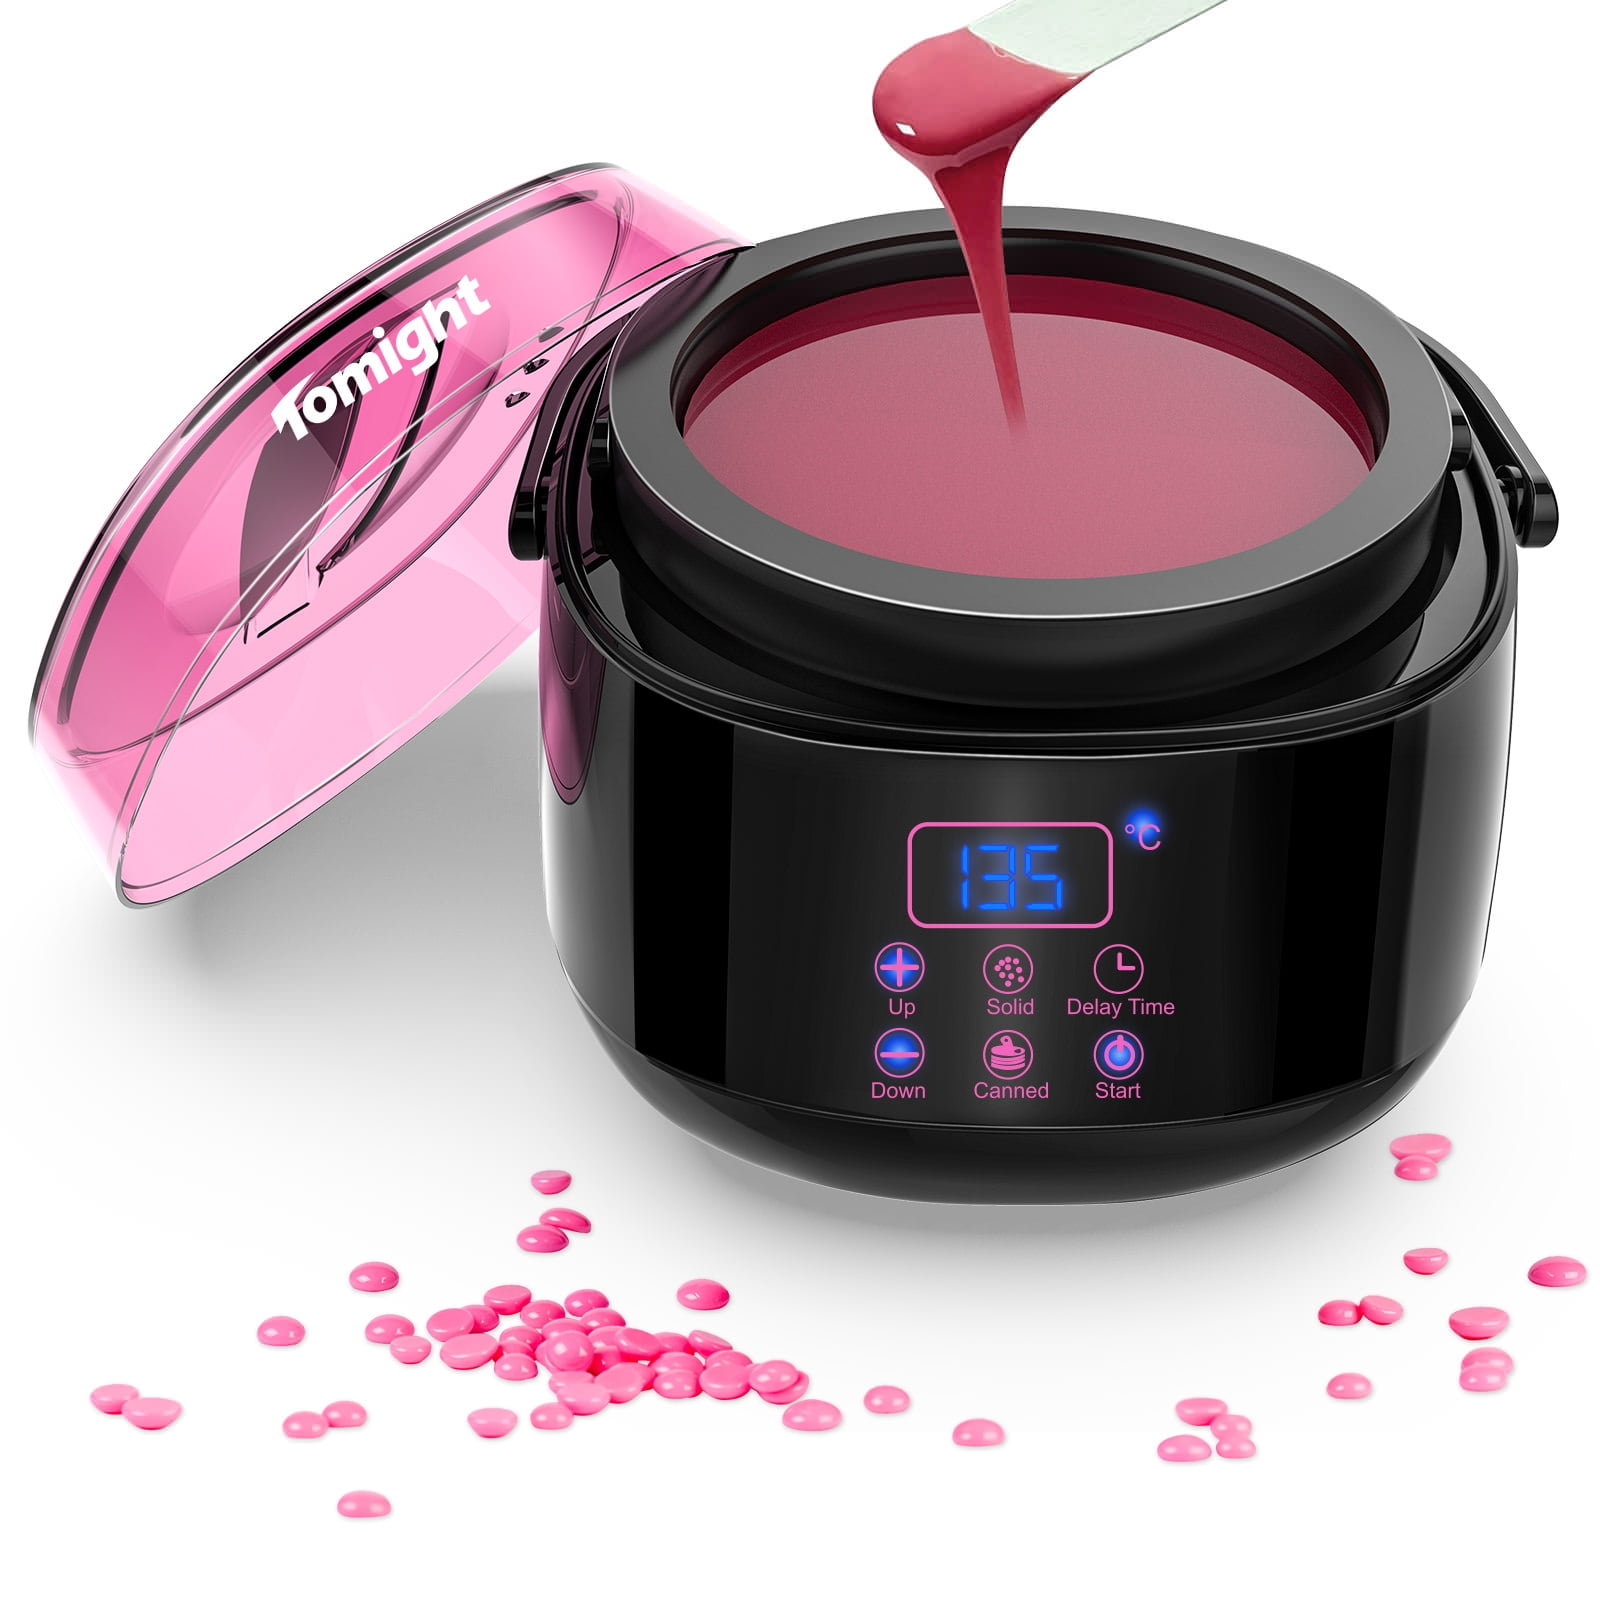 Famree Waxing Kit-Professional Wax Warmer for Hair Removal,Non-Stick Wax  Pot Wax Heater Hair Removal Kit with LED Disply/Touch Screen for Sensitive  Skin&All Hair Types 17.6 Ounce